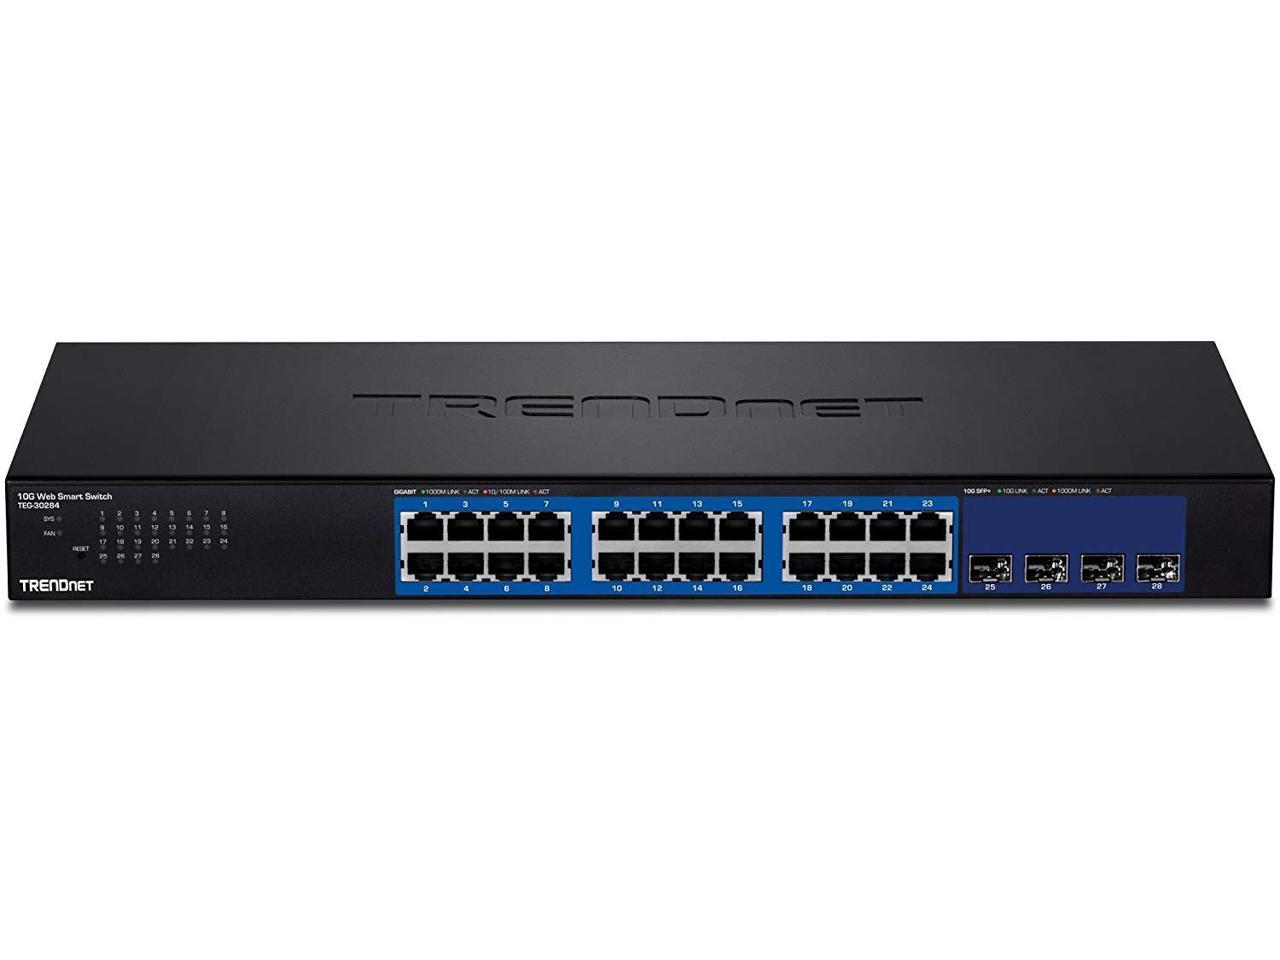 TRENDnet 28-Port Web Smart Switch with 24 x Gigabit Ports and 4 x 10G SFP+ Slots. Limited Life Time Warranty